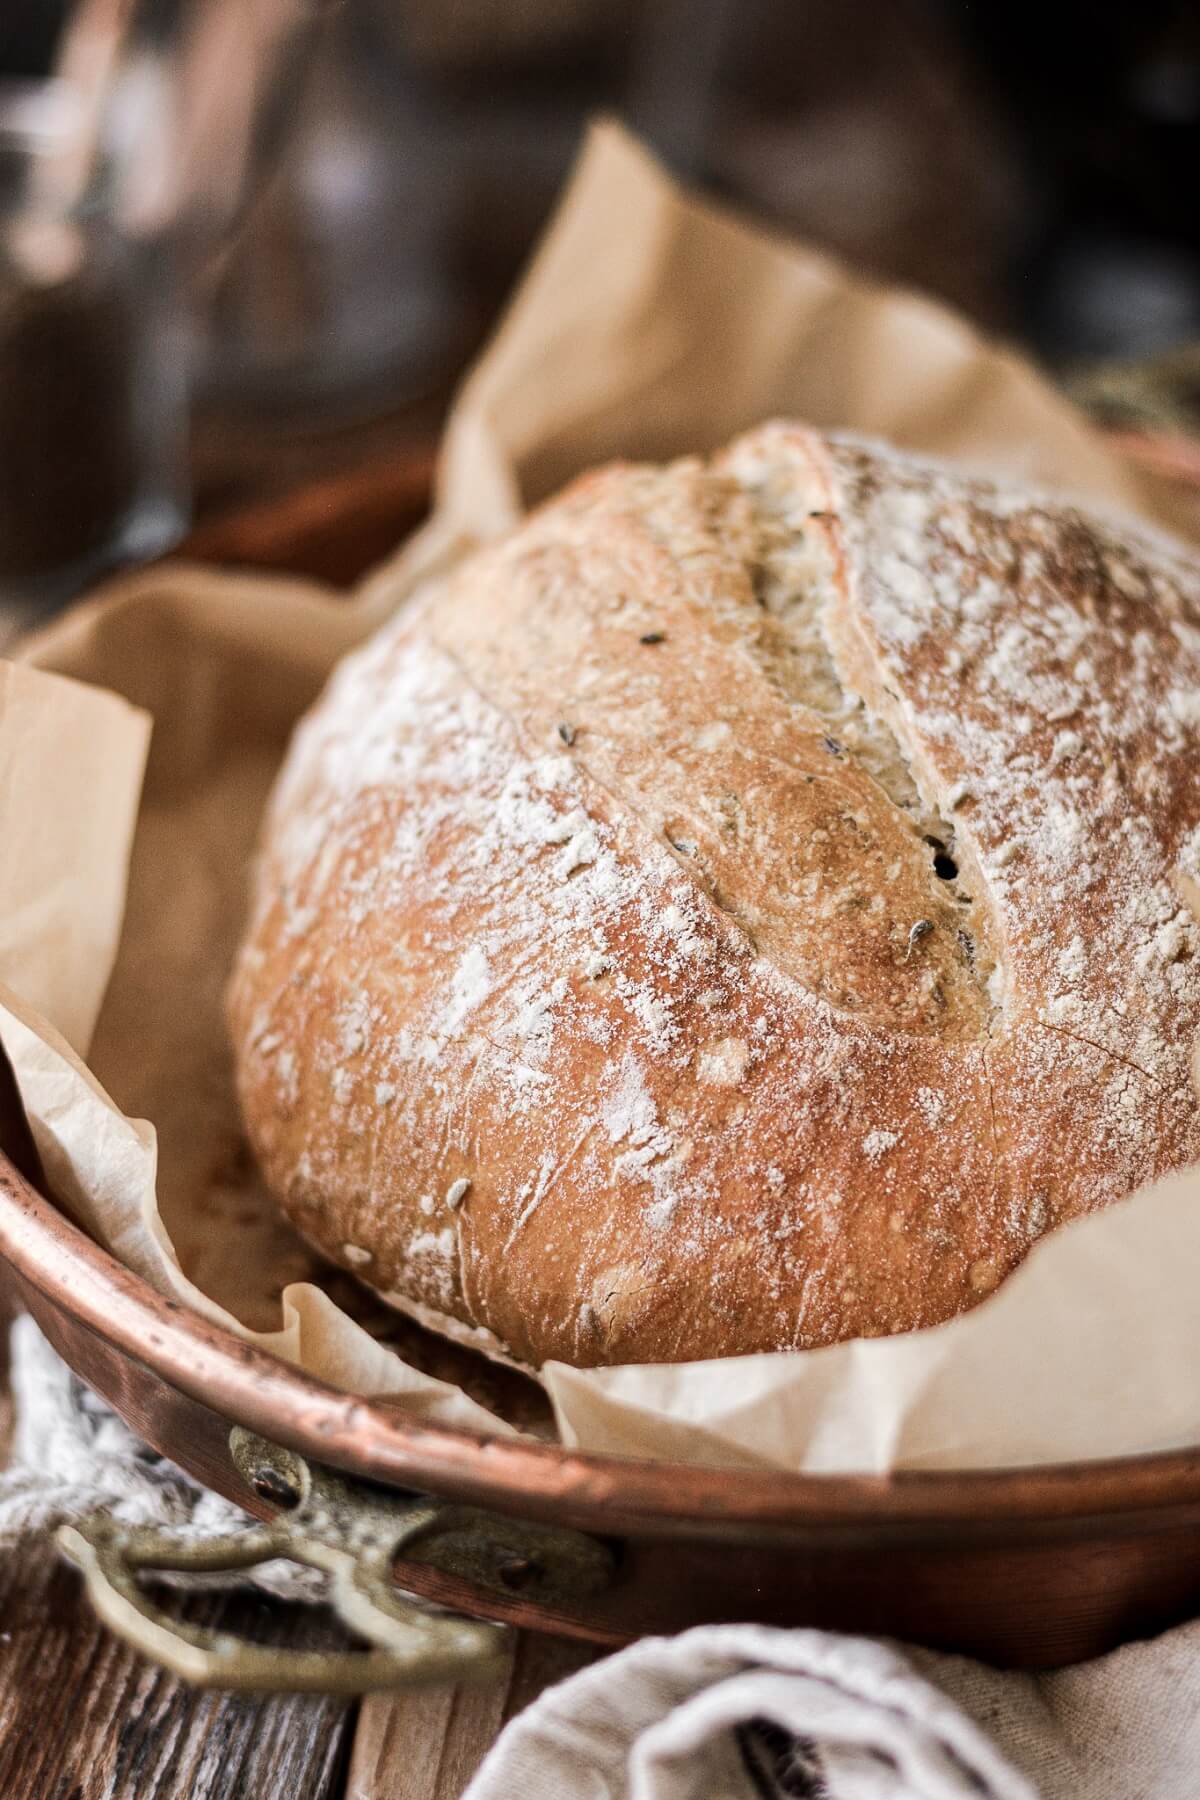 High Altitude No Knead Bread (Rustic Artisan Boule) - Curly Girl Kitchen